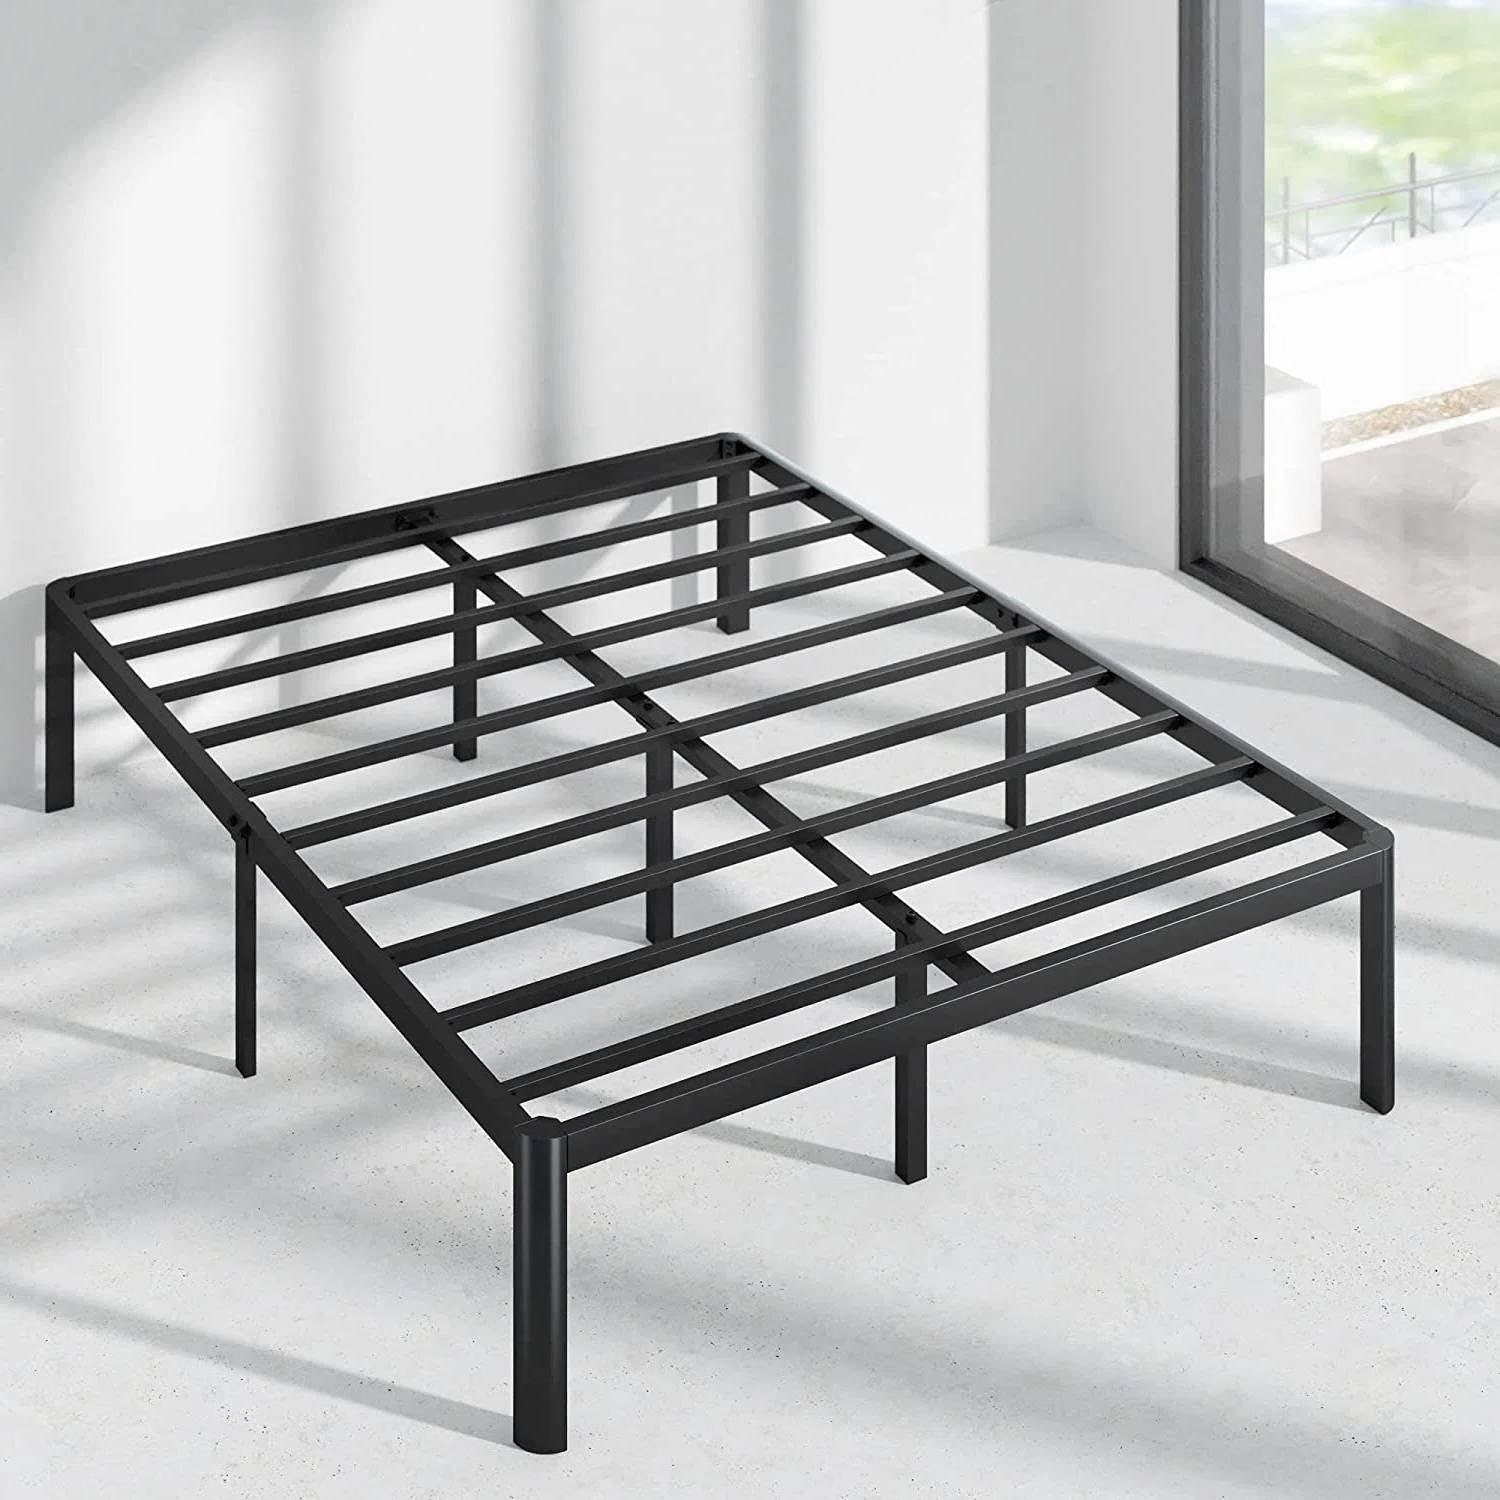 Bedroom > Bed Frames > Platform Beds - King Metal Platform Bed Frame With Rounded Legs 700 Lbs Weight Capacity